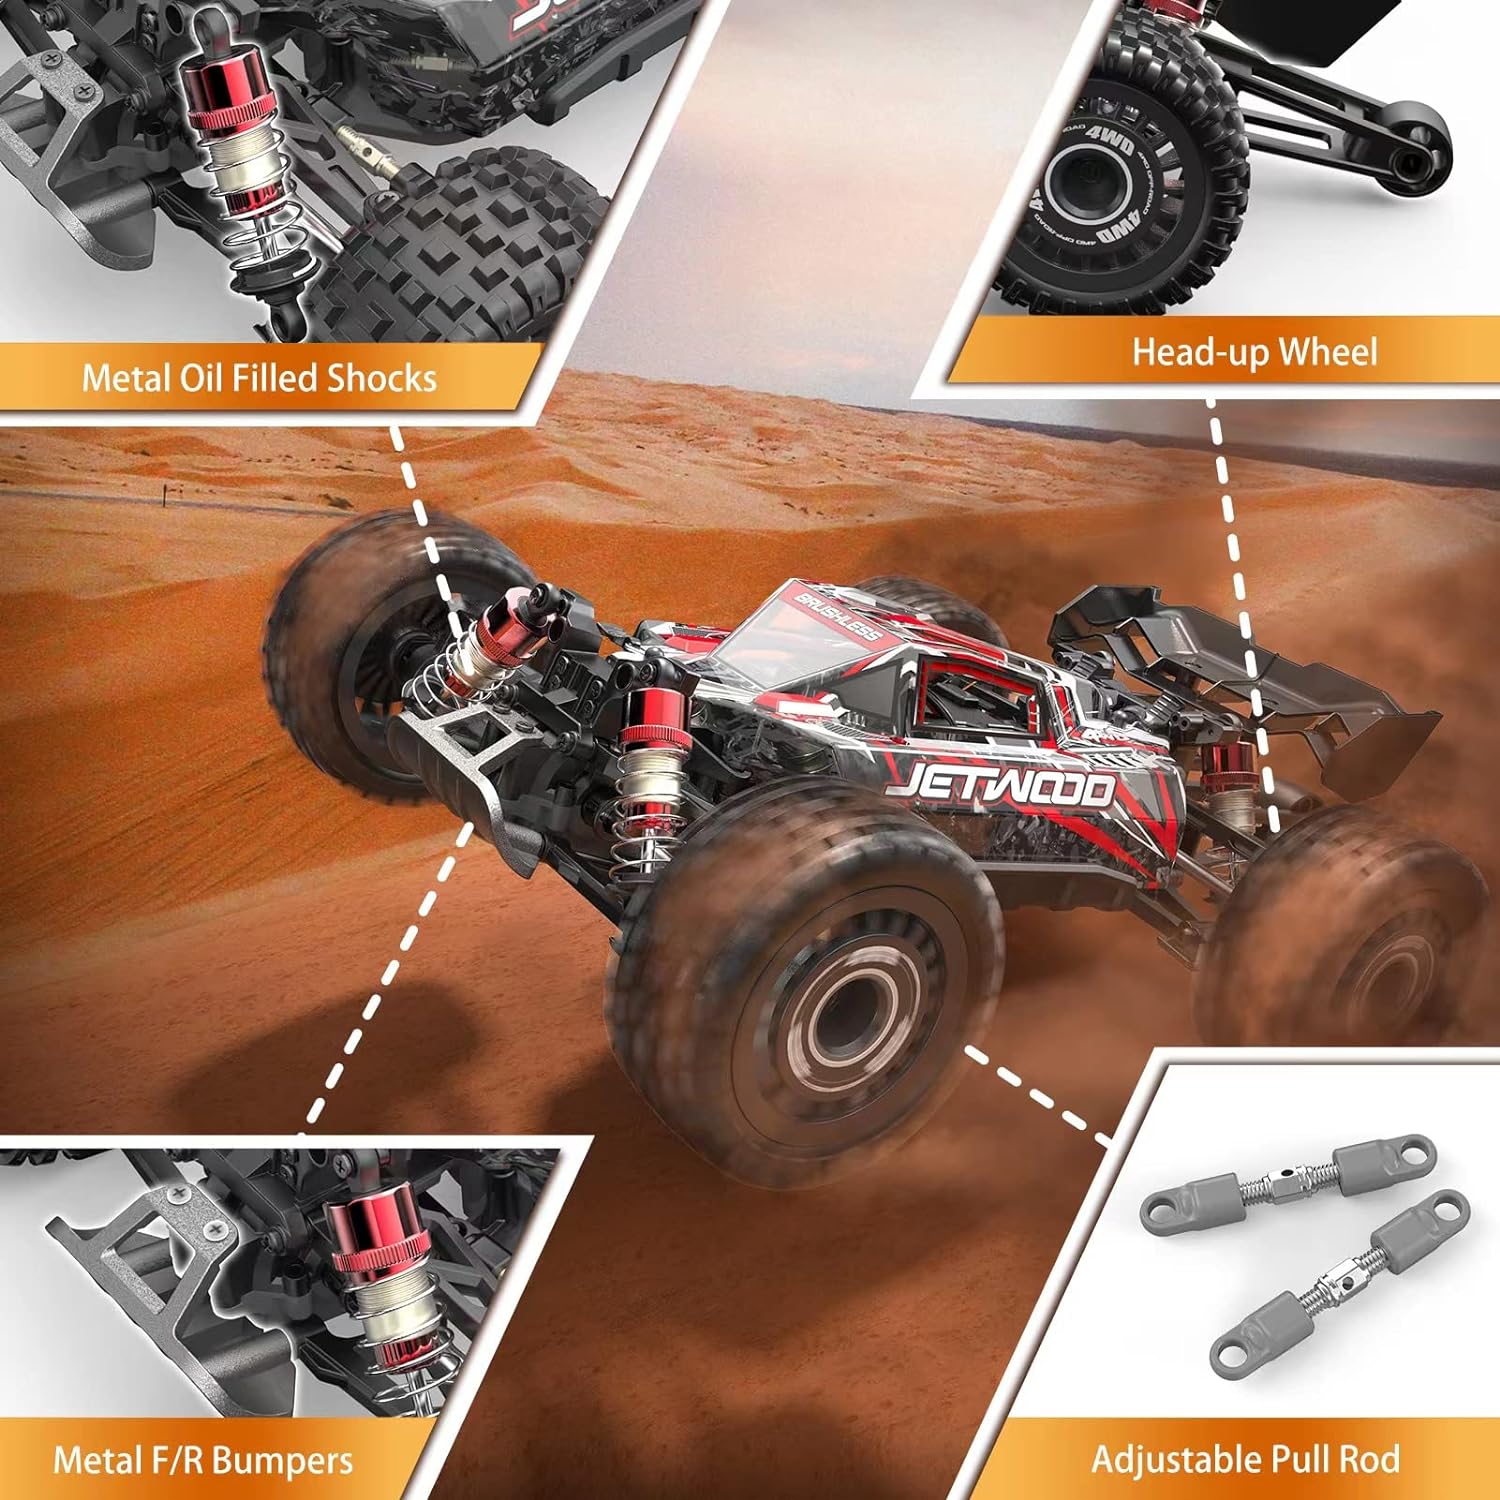 Jetwood Remote Control Car 1:16 Scale, 4WD RTR Brushless Fast Cars for Adults All Terrain, Max 42mph Off-Road Hobby Electric Buggy, JC16EP with 2 Batteries, RC Truck Gifts for Boys